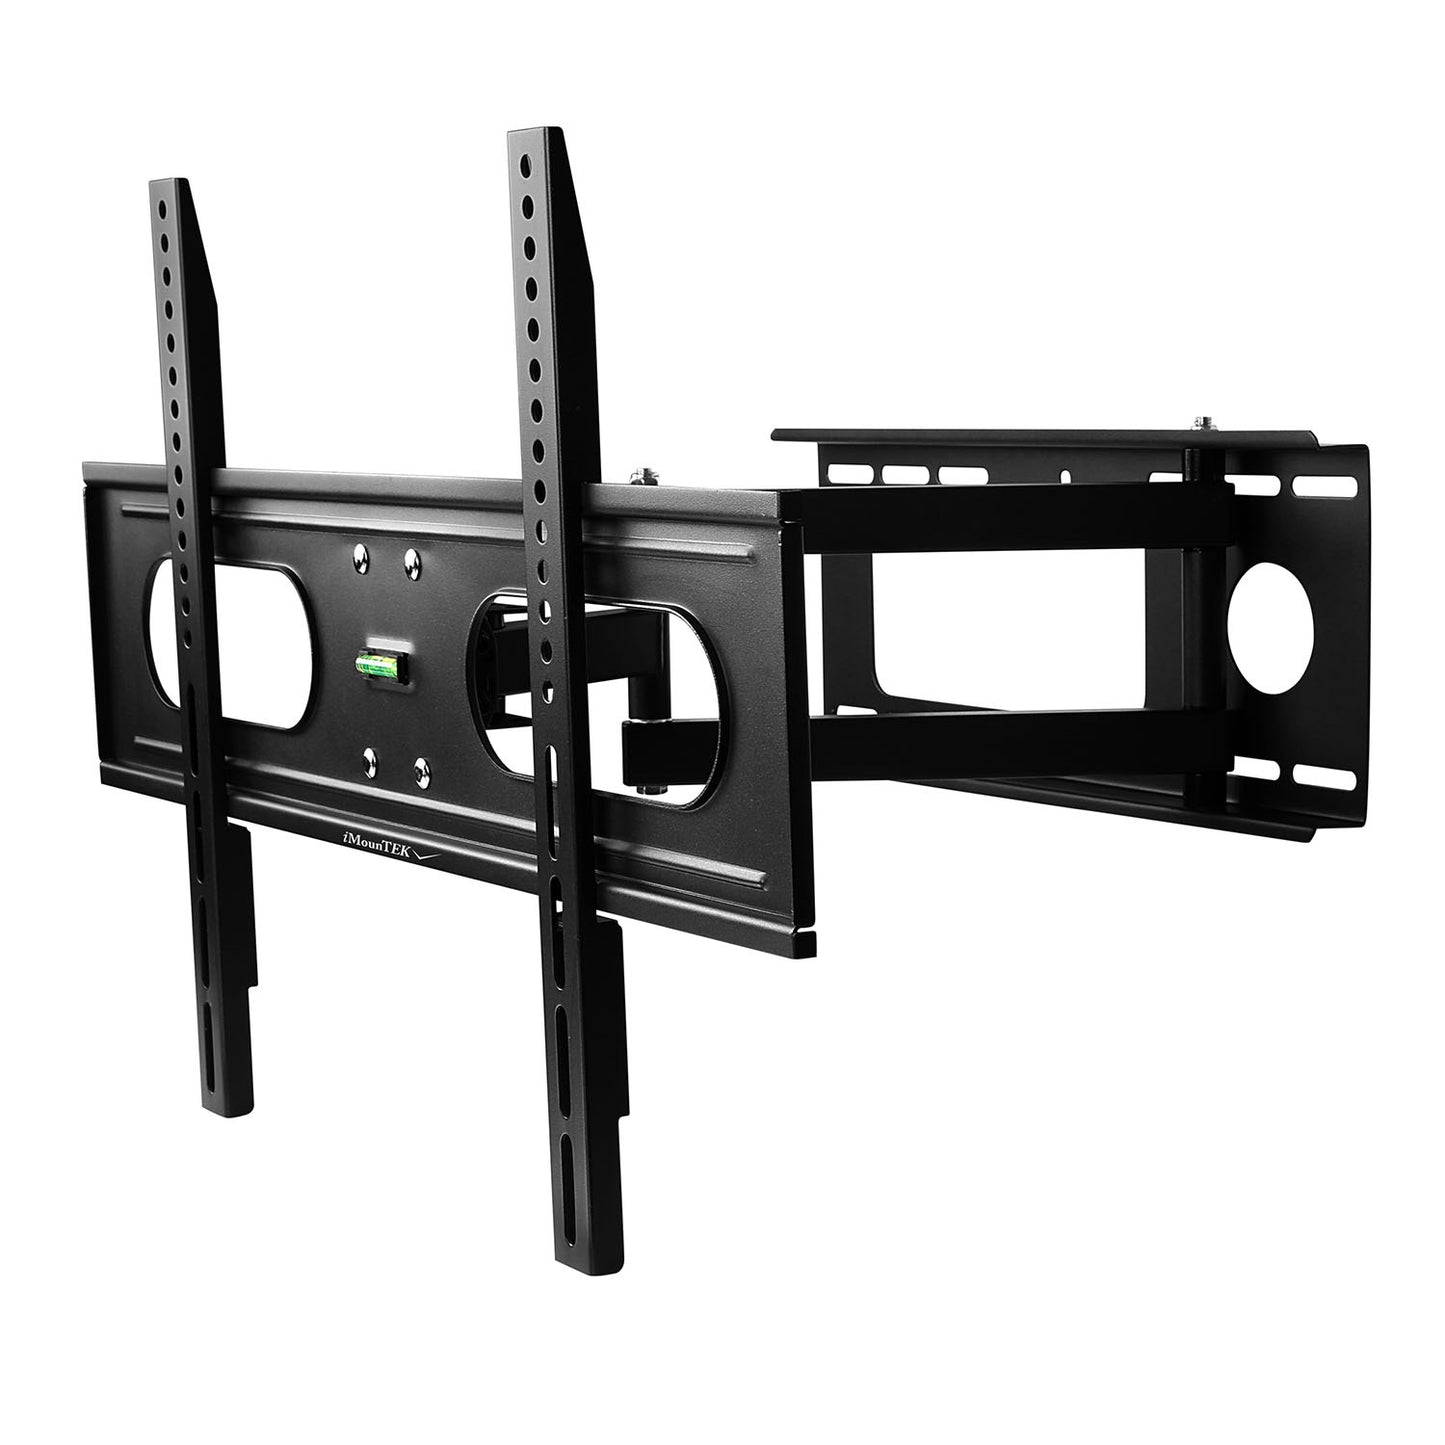 Full Motion TV Wall Mount Swivel Tilt TV Wall Rack Support 37-70” TV Wall Mount Max VESA Up To 600x400mm Holds Up To 99LBS - Black -